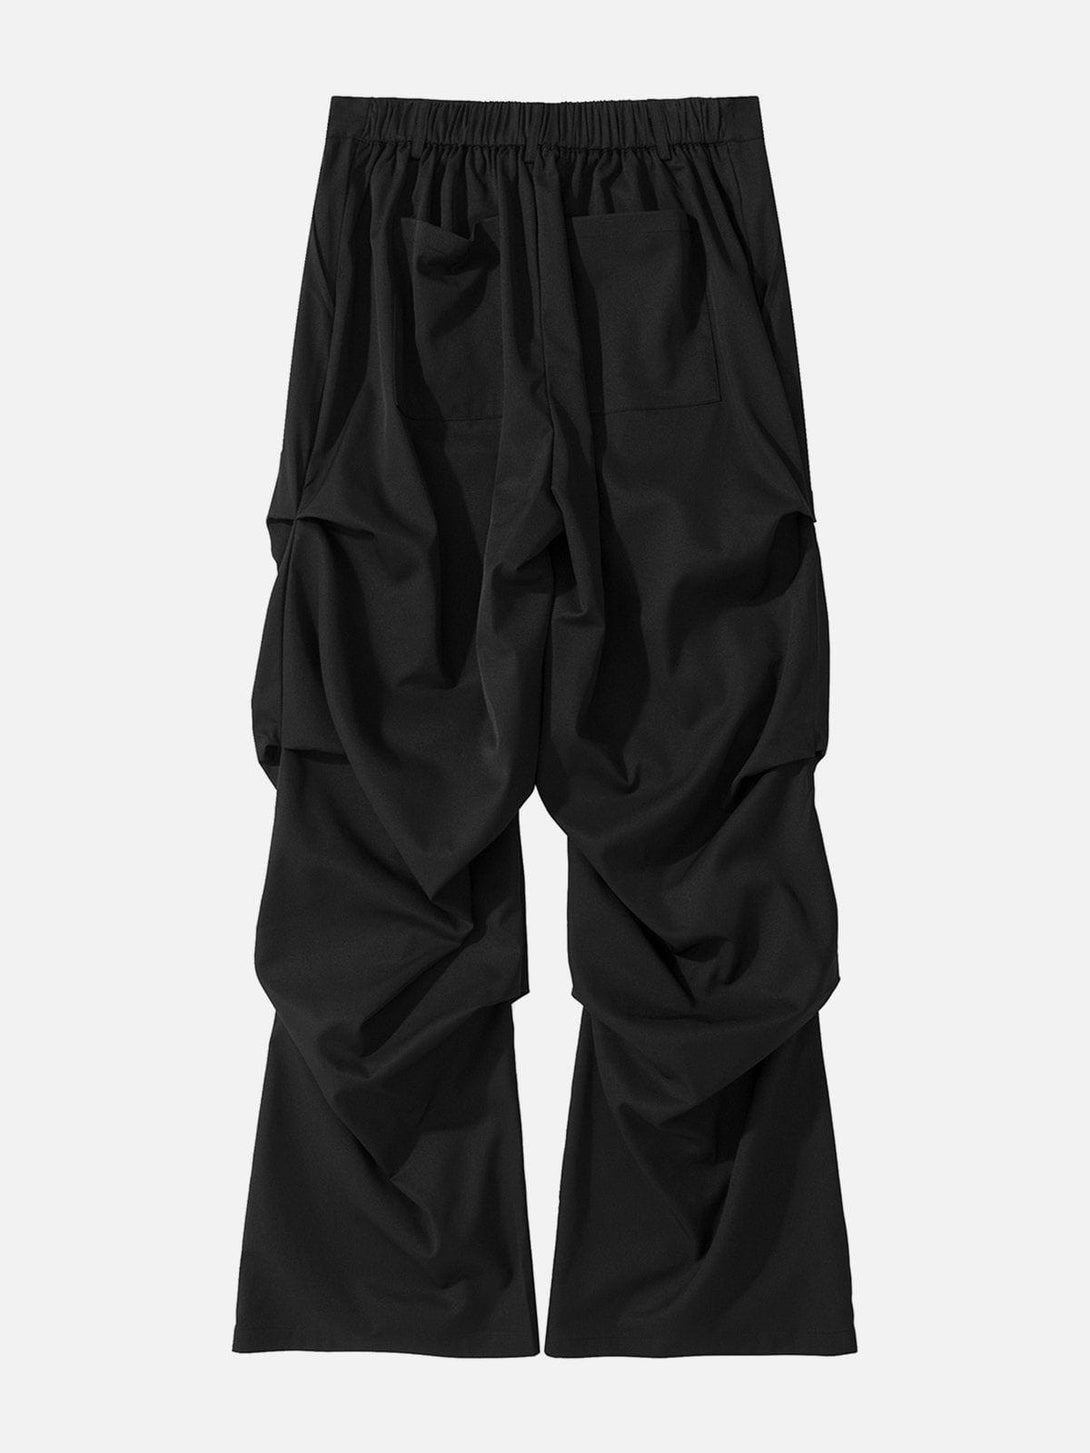 Majesda® - Solid Pleated Technical Cargo Pants outfit ideas streetwear fashion